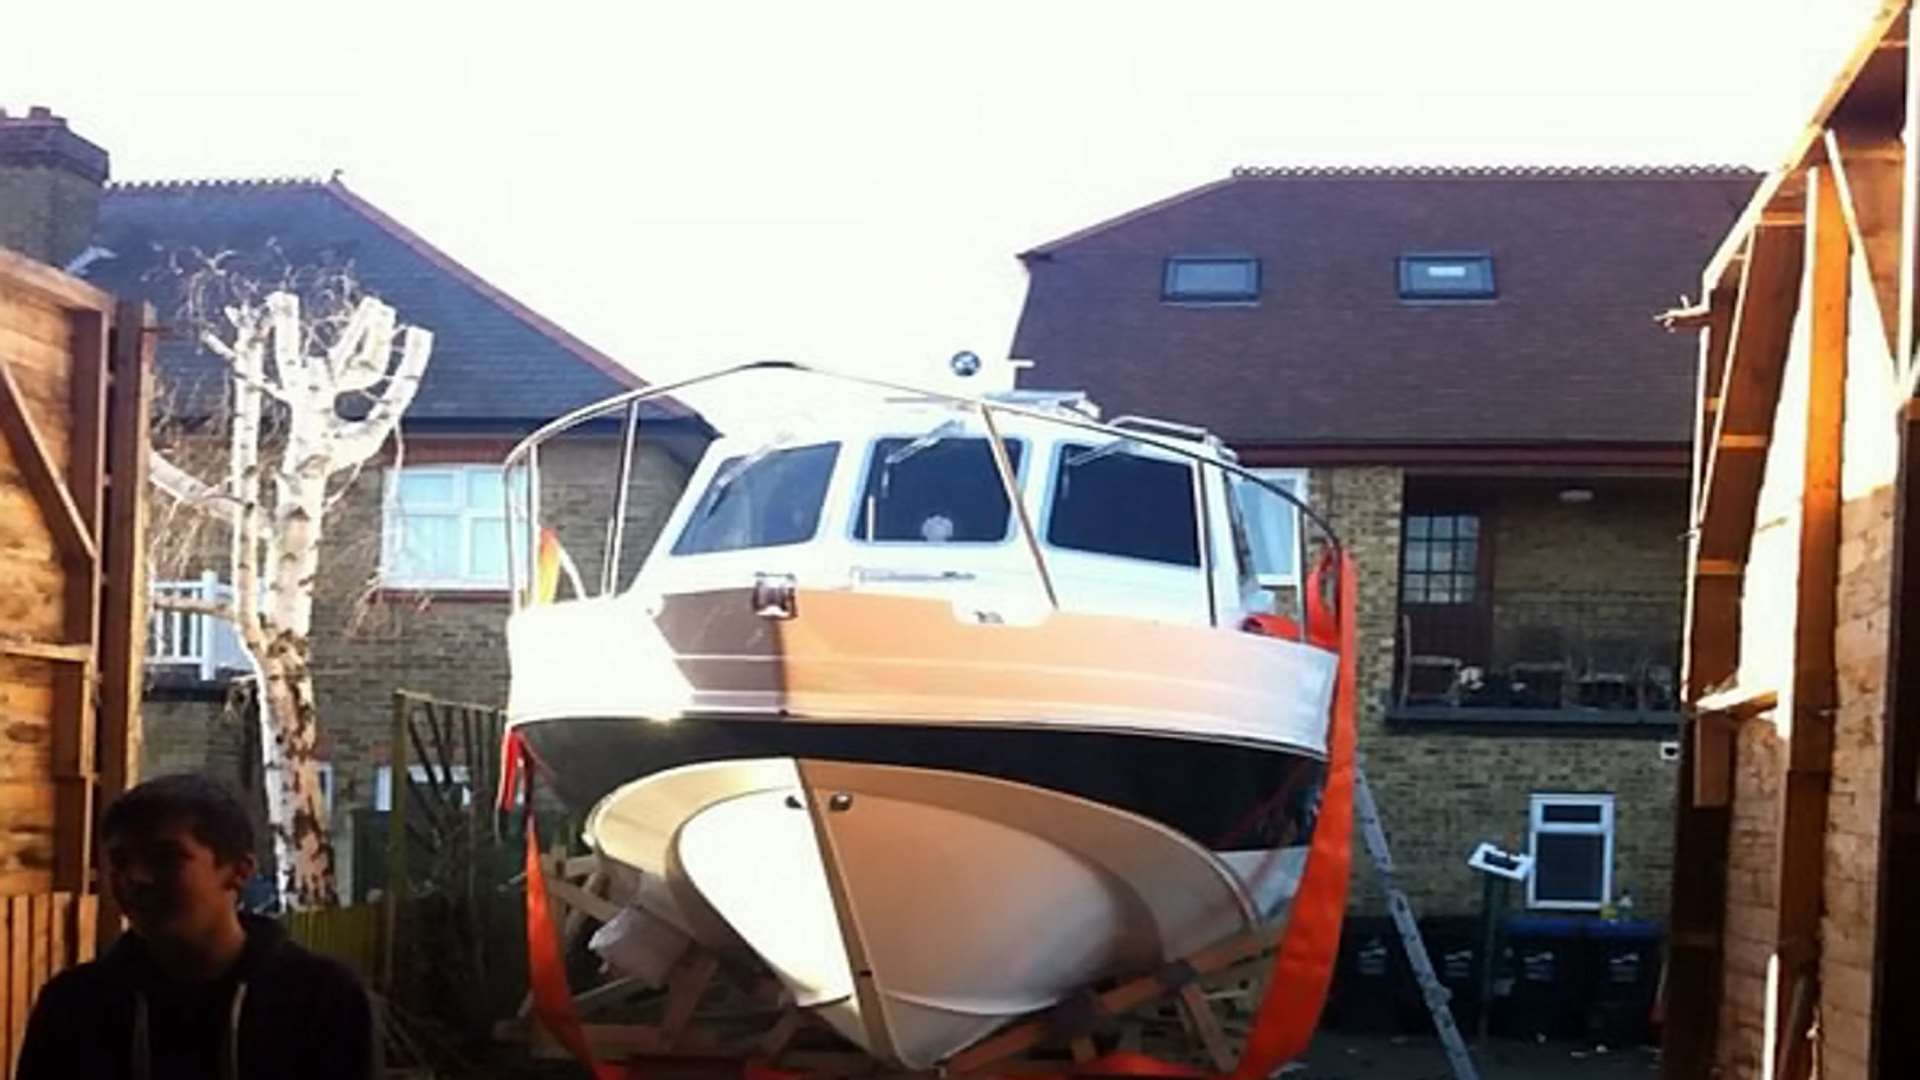 The boat was stuck in the garden where it was built. Picture: SWNS